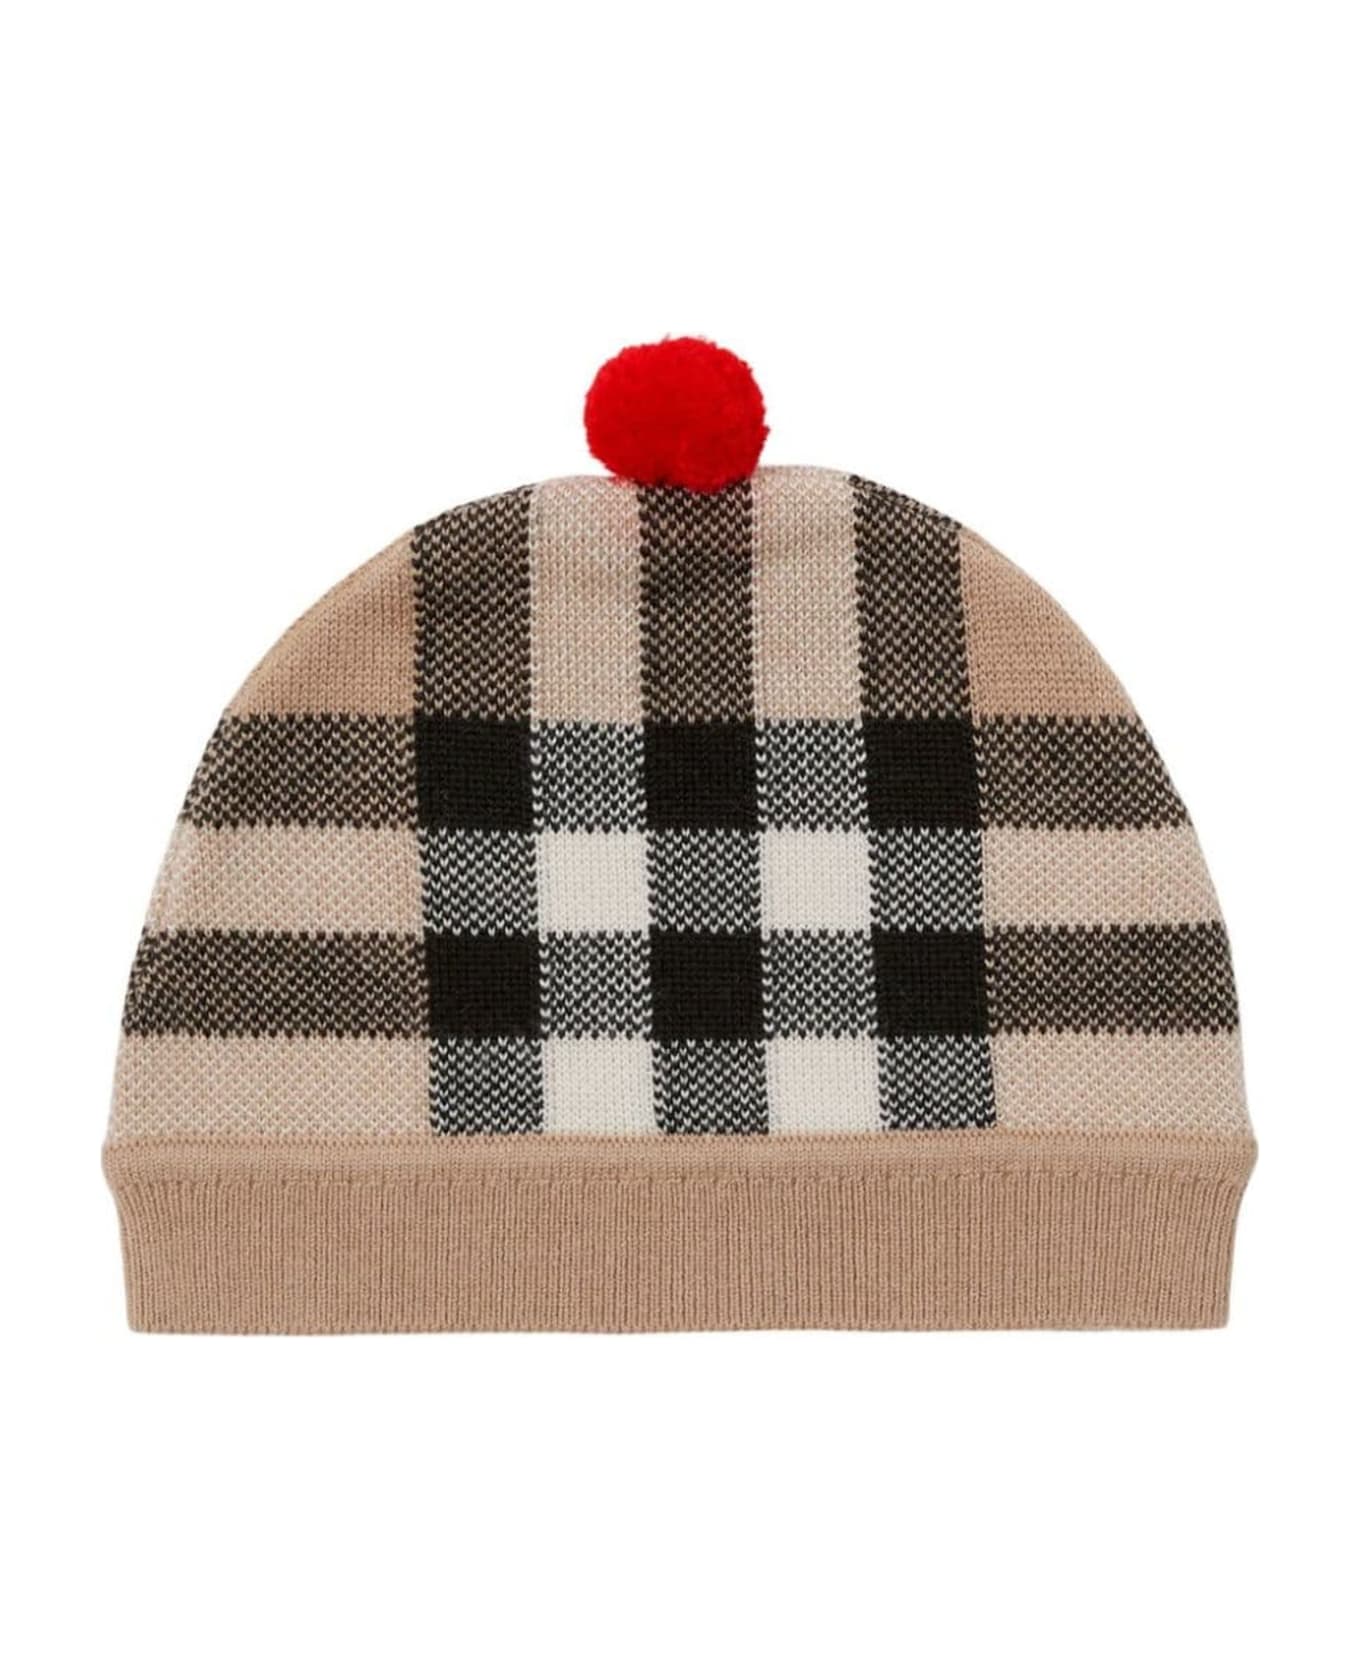 Burberry Check Wool Beanie - Archive Beige